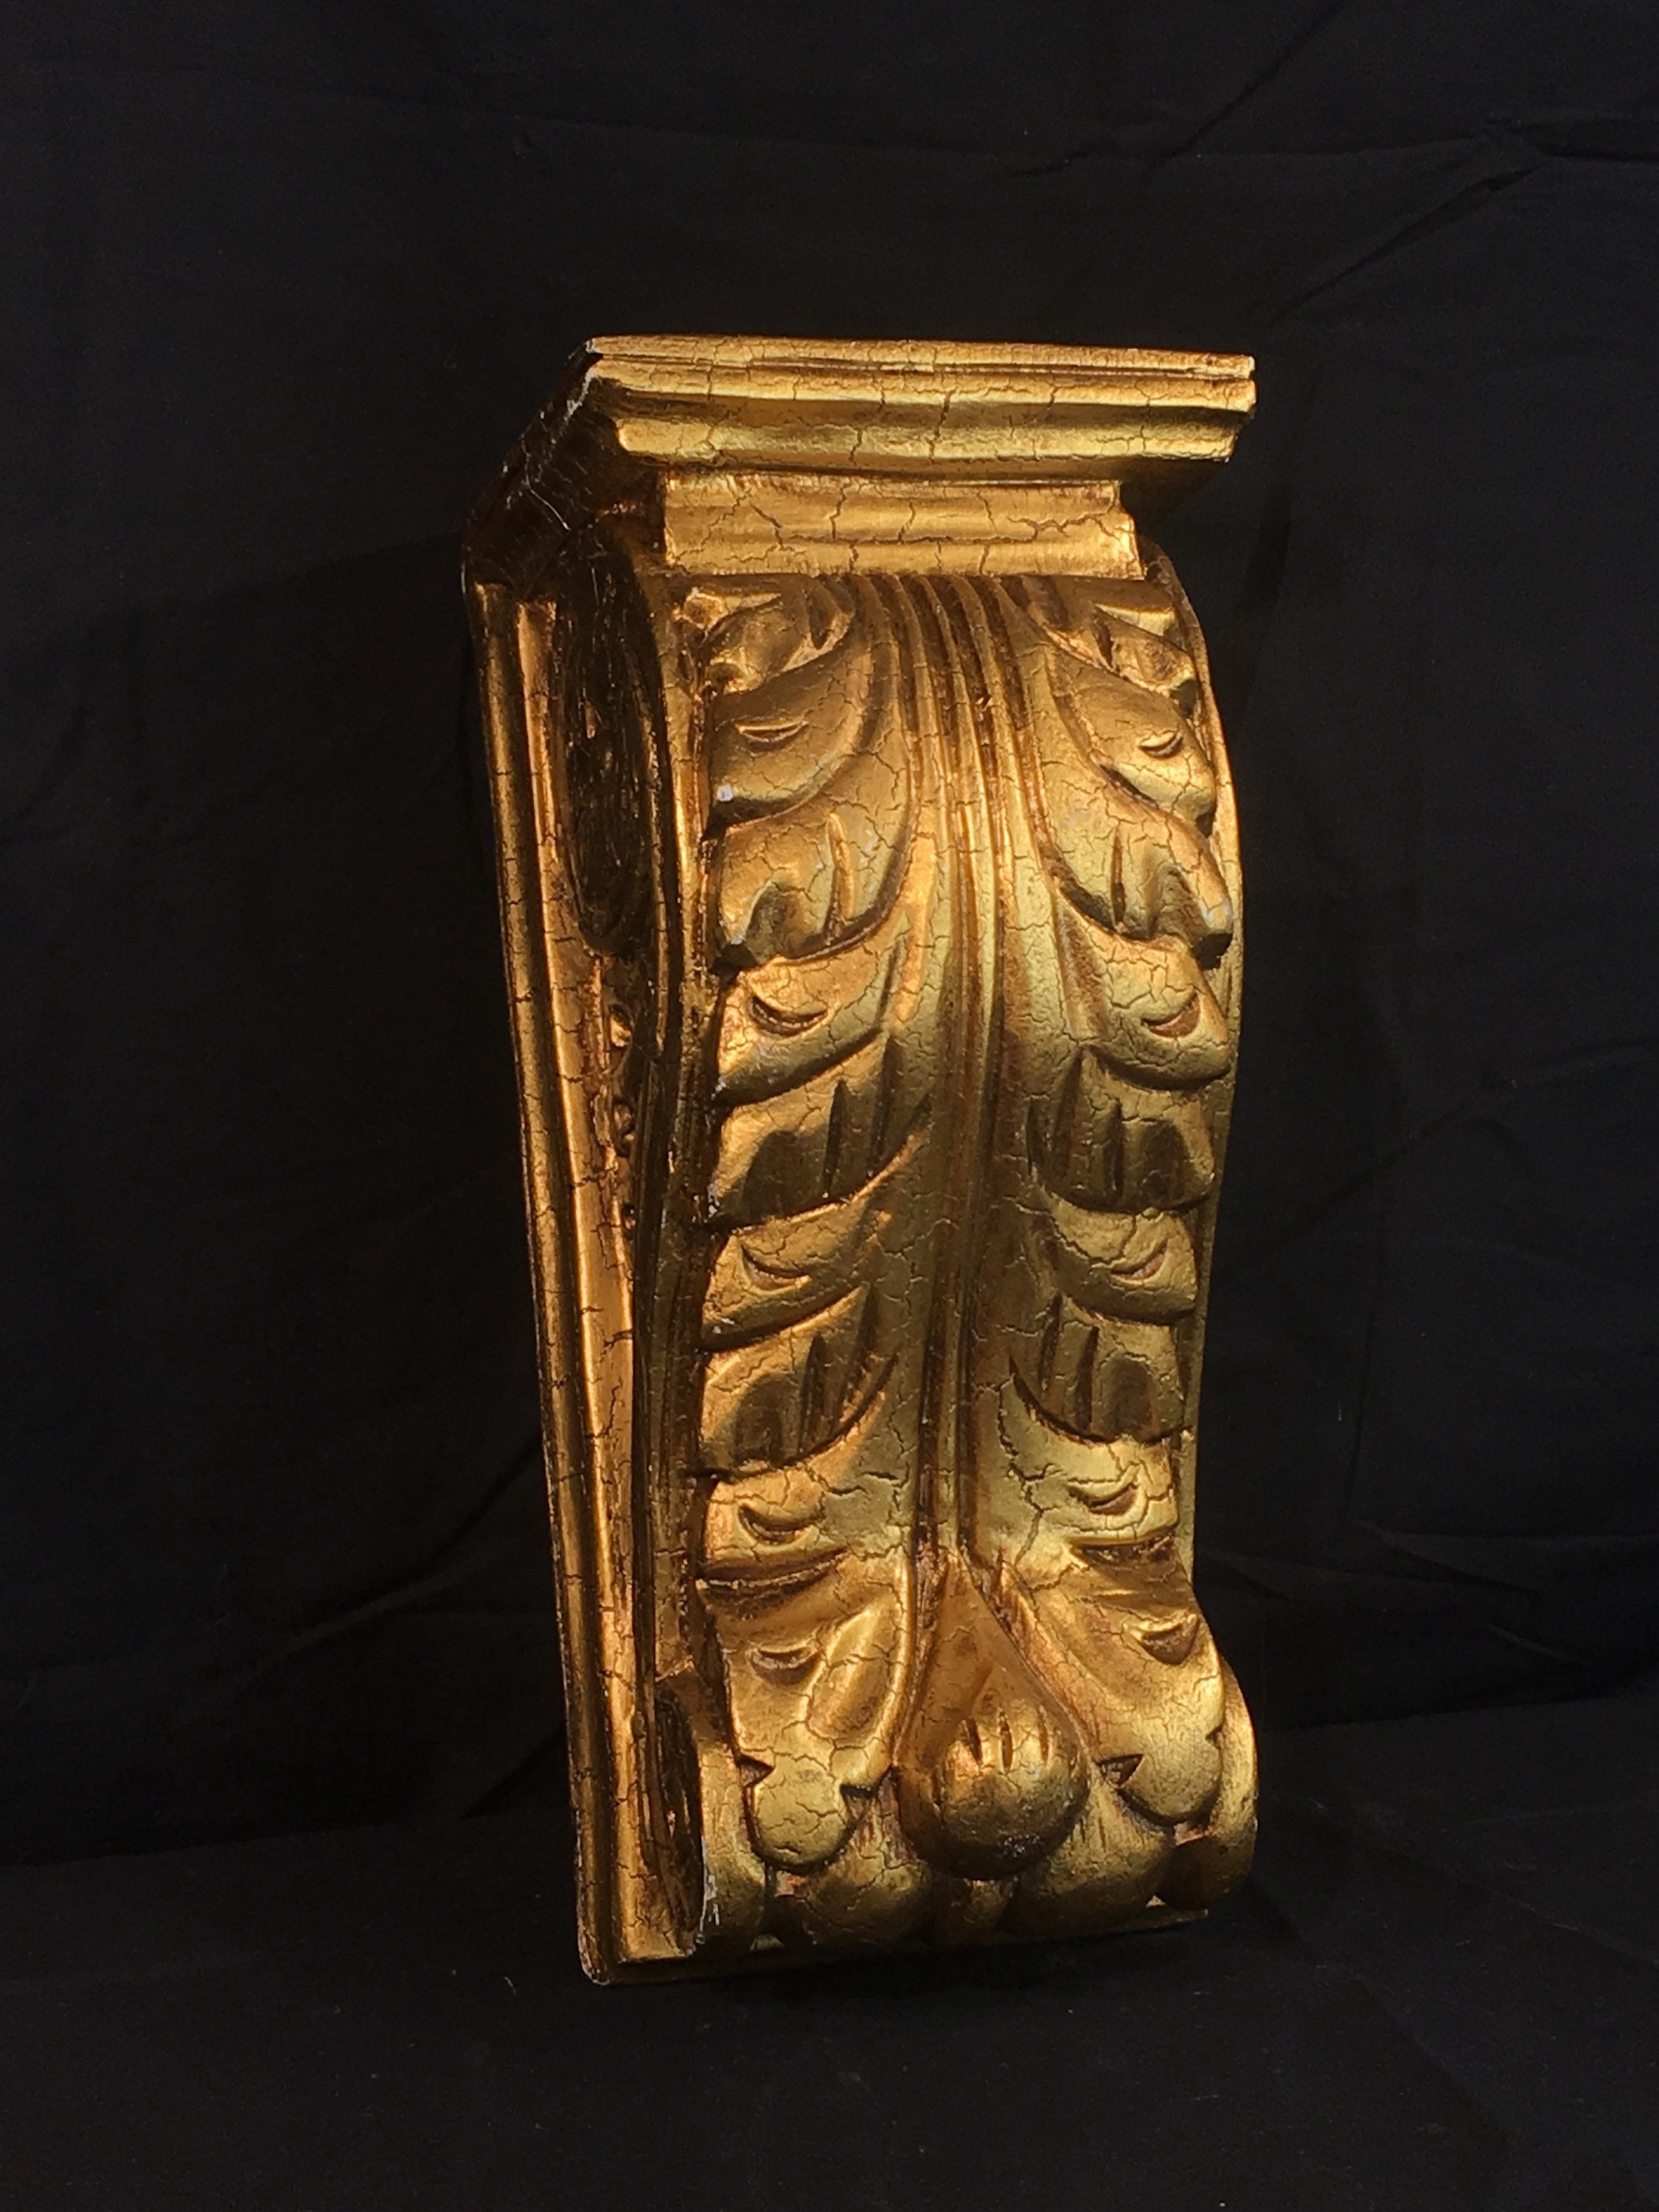 Vintage Gold Wall Shelf, Florentine Sconce, Carved Wooden ... on Wooden Wall Sconce Shelf Decorating id=27672